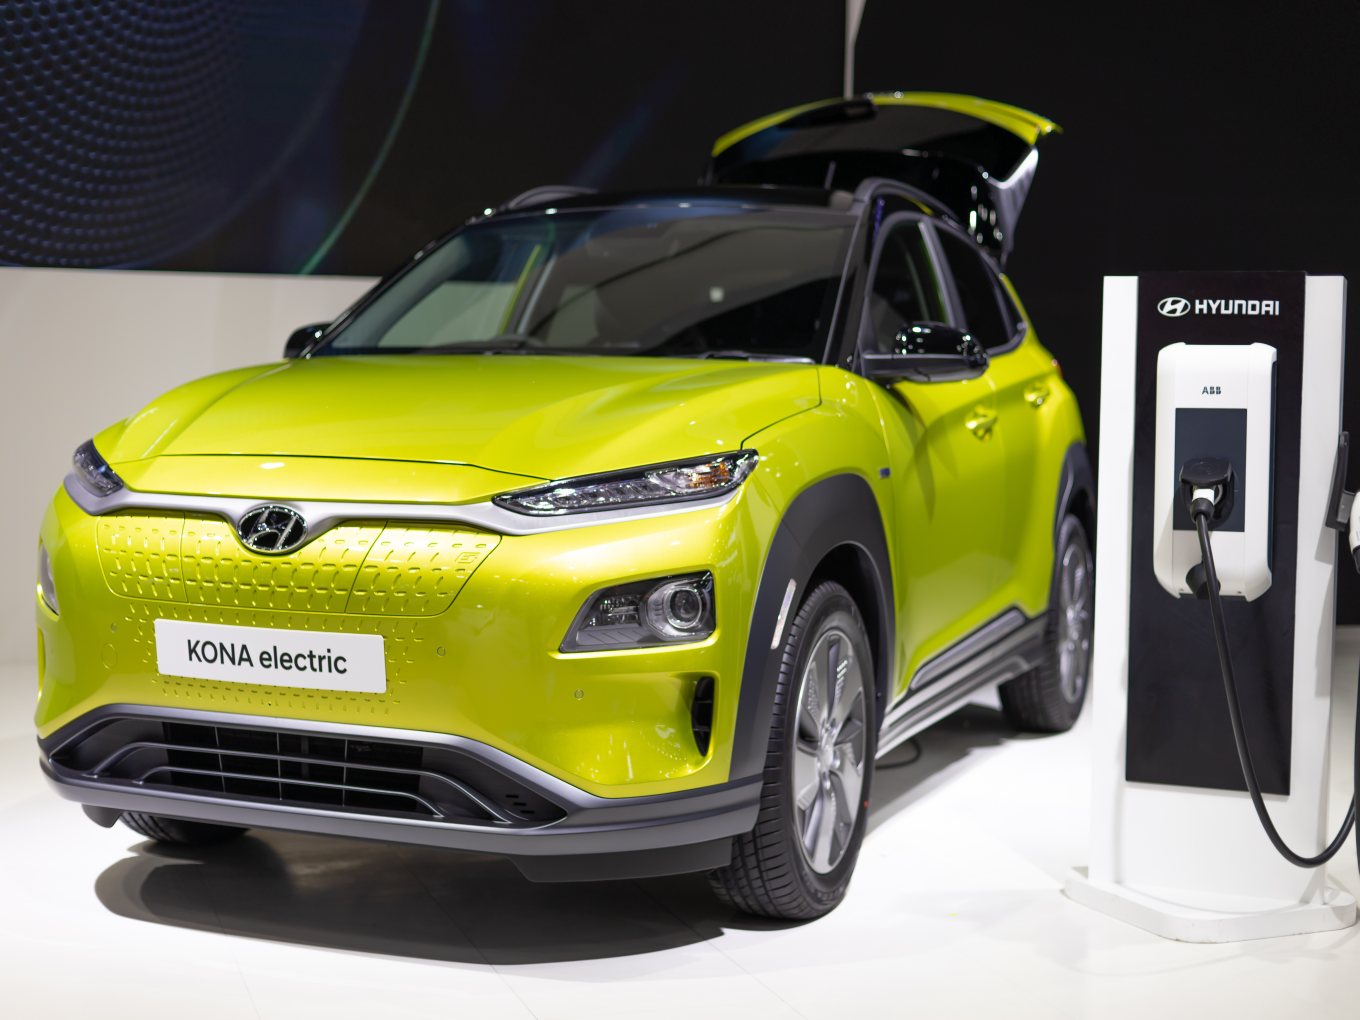 Hyundai Gears Up To Bring Mass Market EV In Two Years